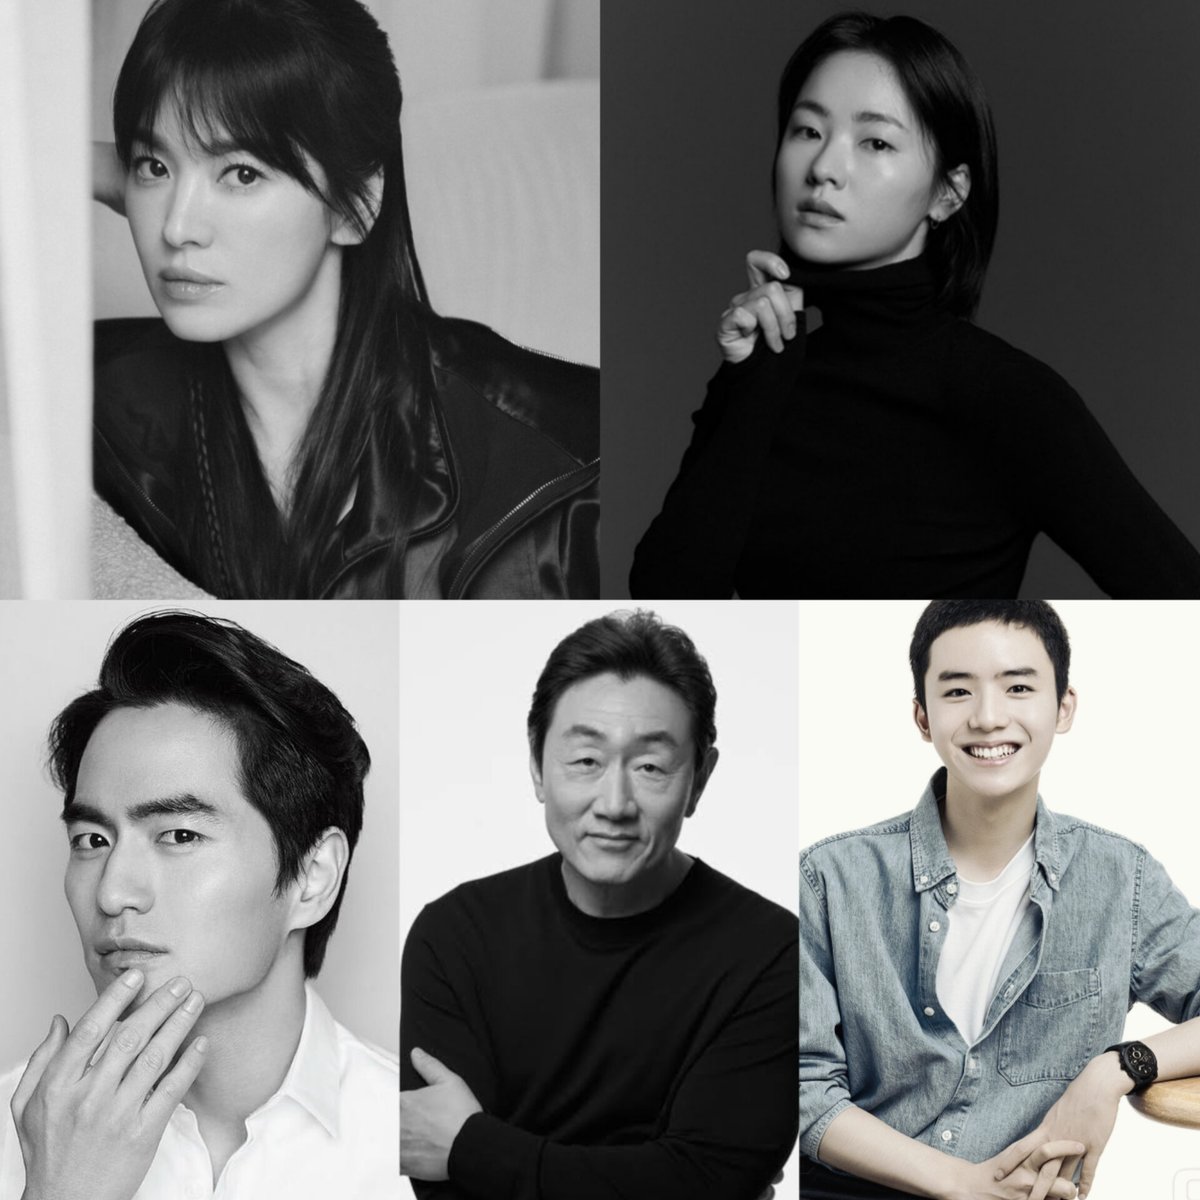 #DarkNuns spin-off of 2015 film 'The Priests'

Confirmed cast:
#SongHyeKyo #JeonYeoBeen as nuns who perform exorcisms

#LeeJinWook as a priest & psychiatrist

#HeoJoonHo as a priest who performs exorcism

#MoonWooJin a boy possessed by powerful evil spirit

Begin filming Feb 22